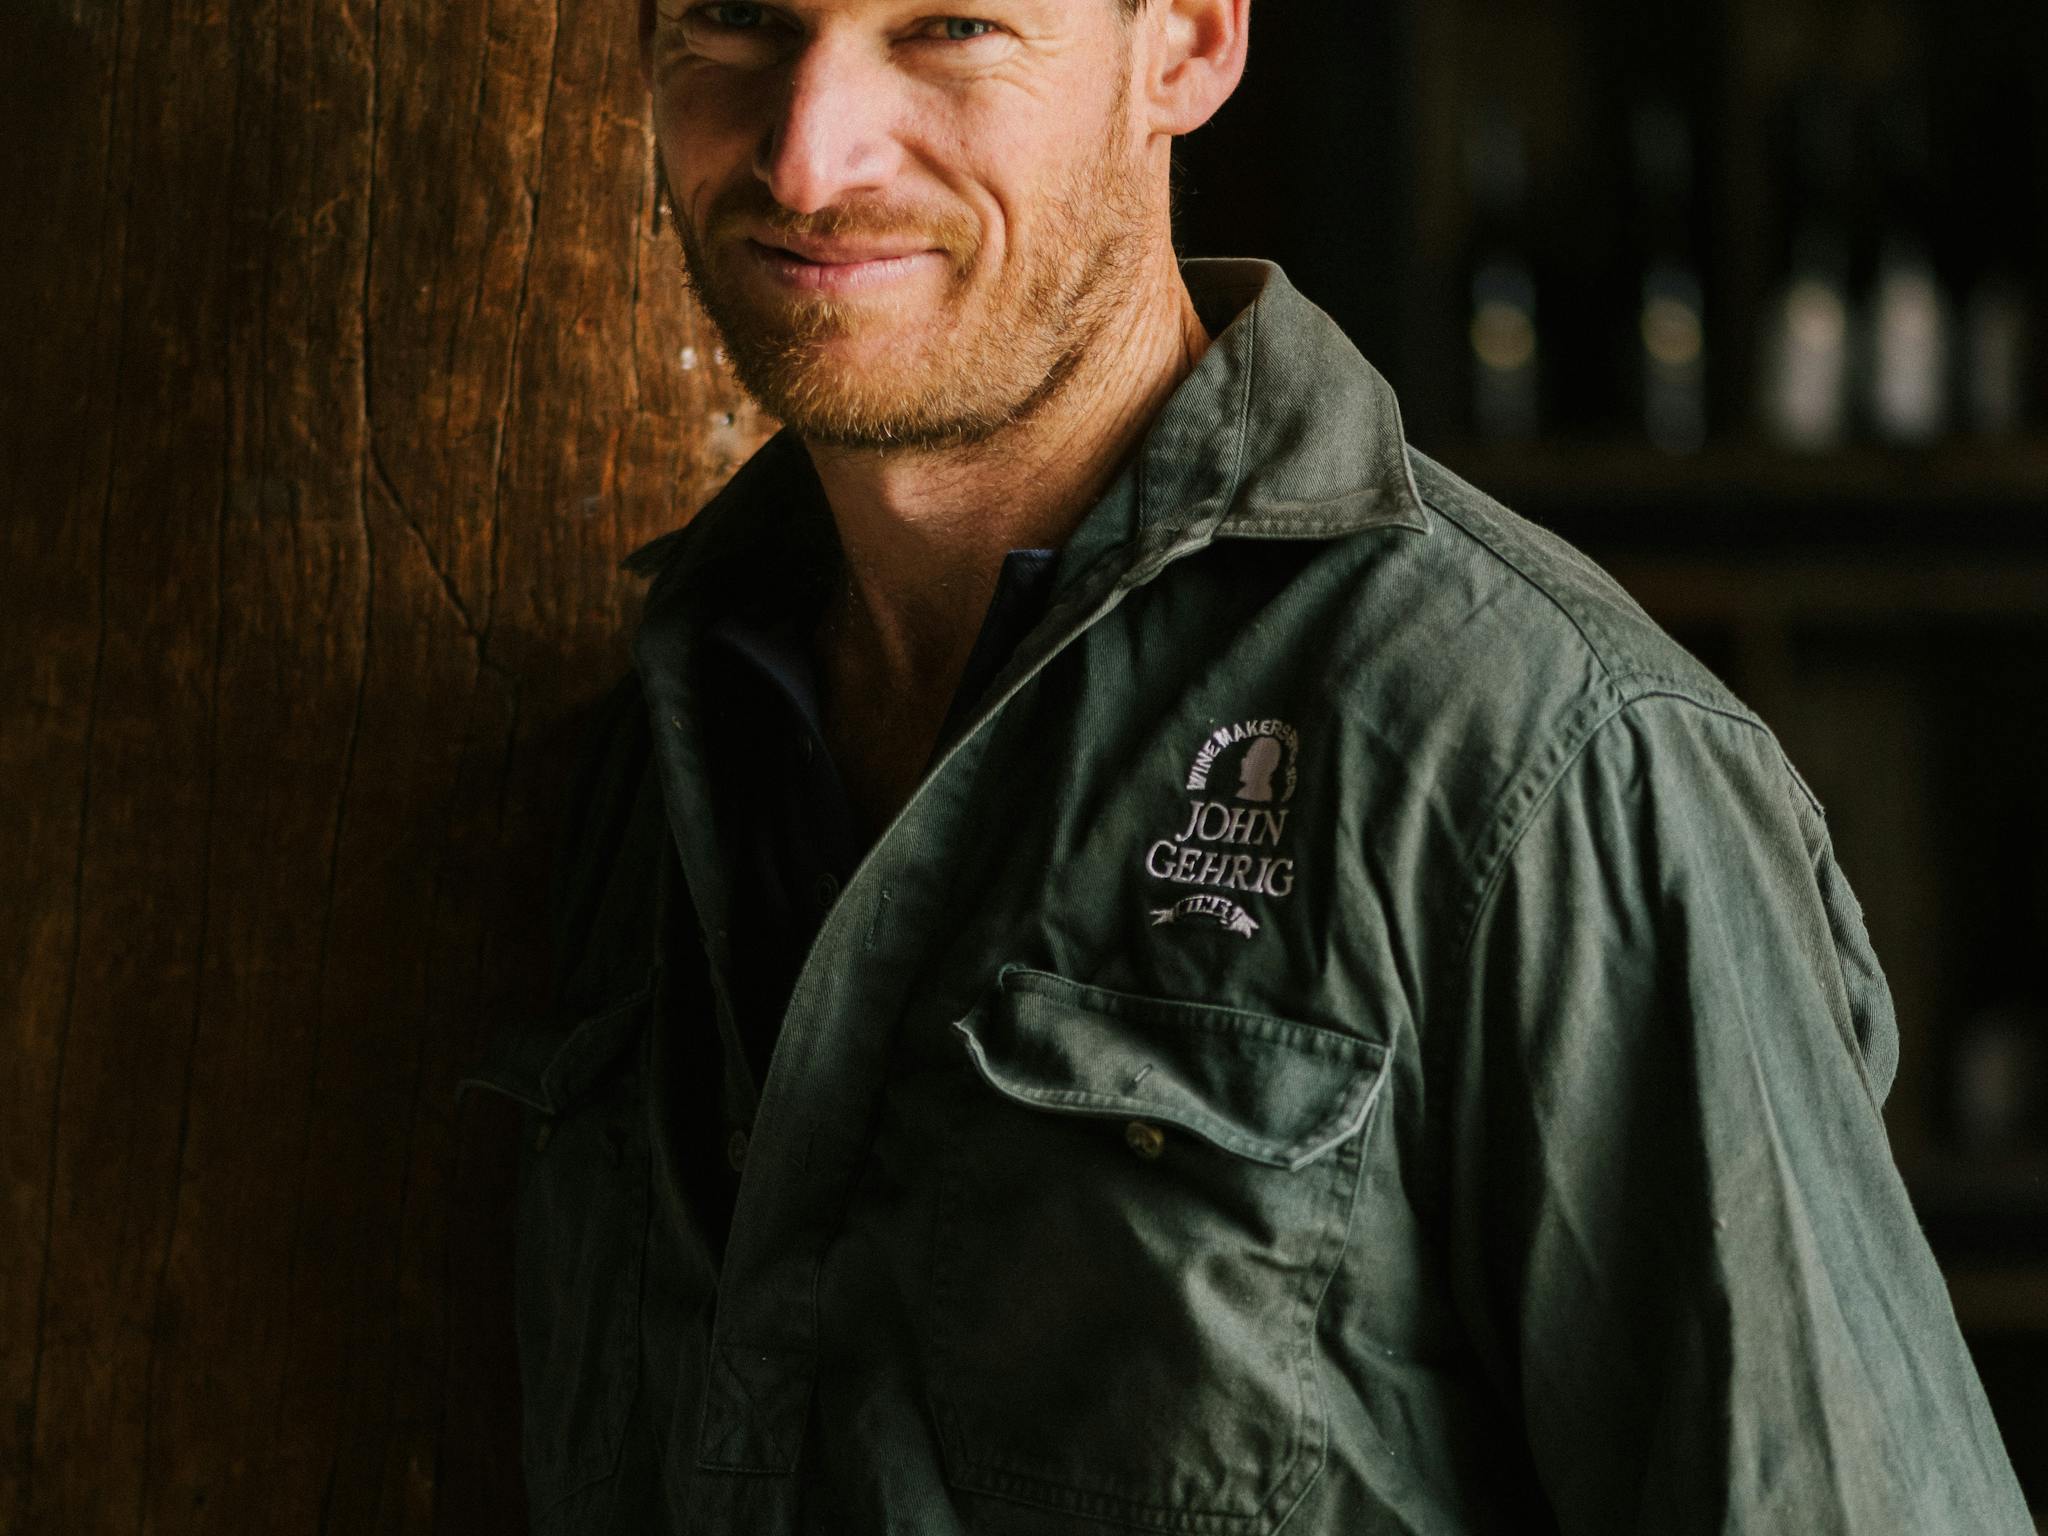 Our winemaker